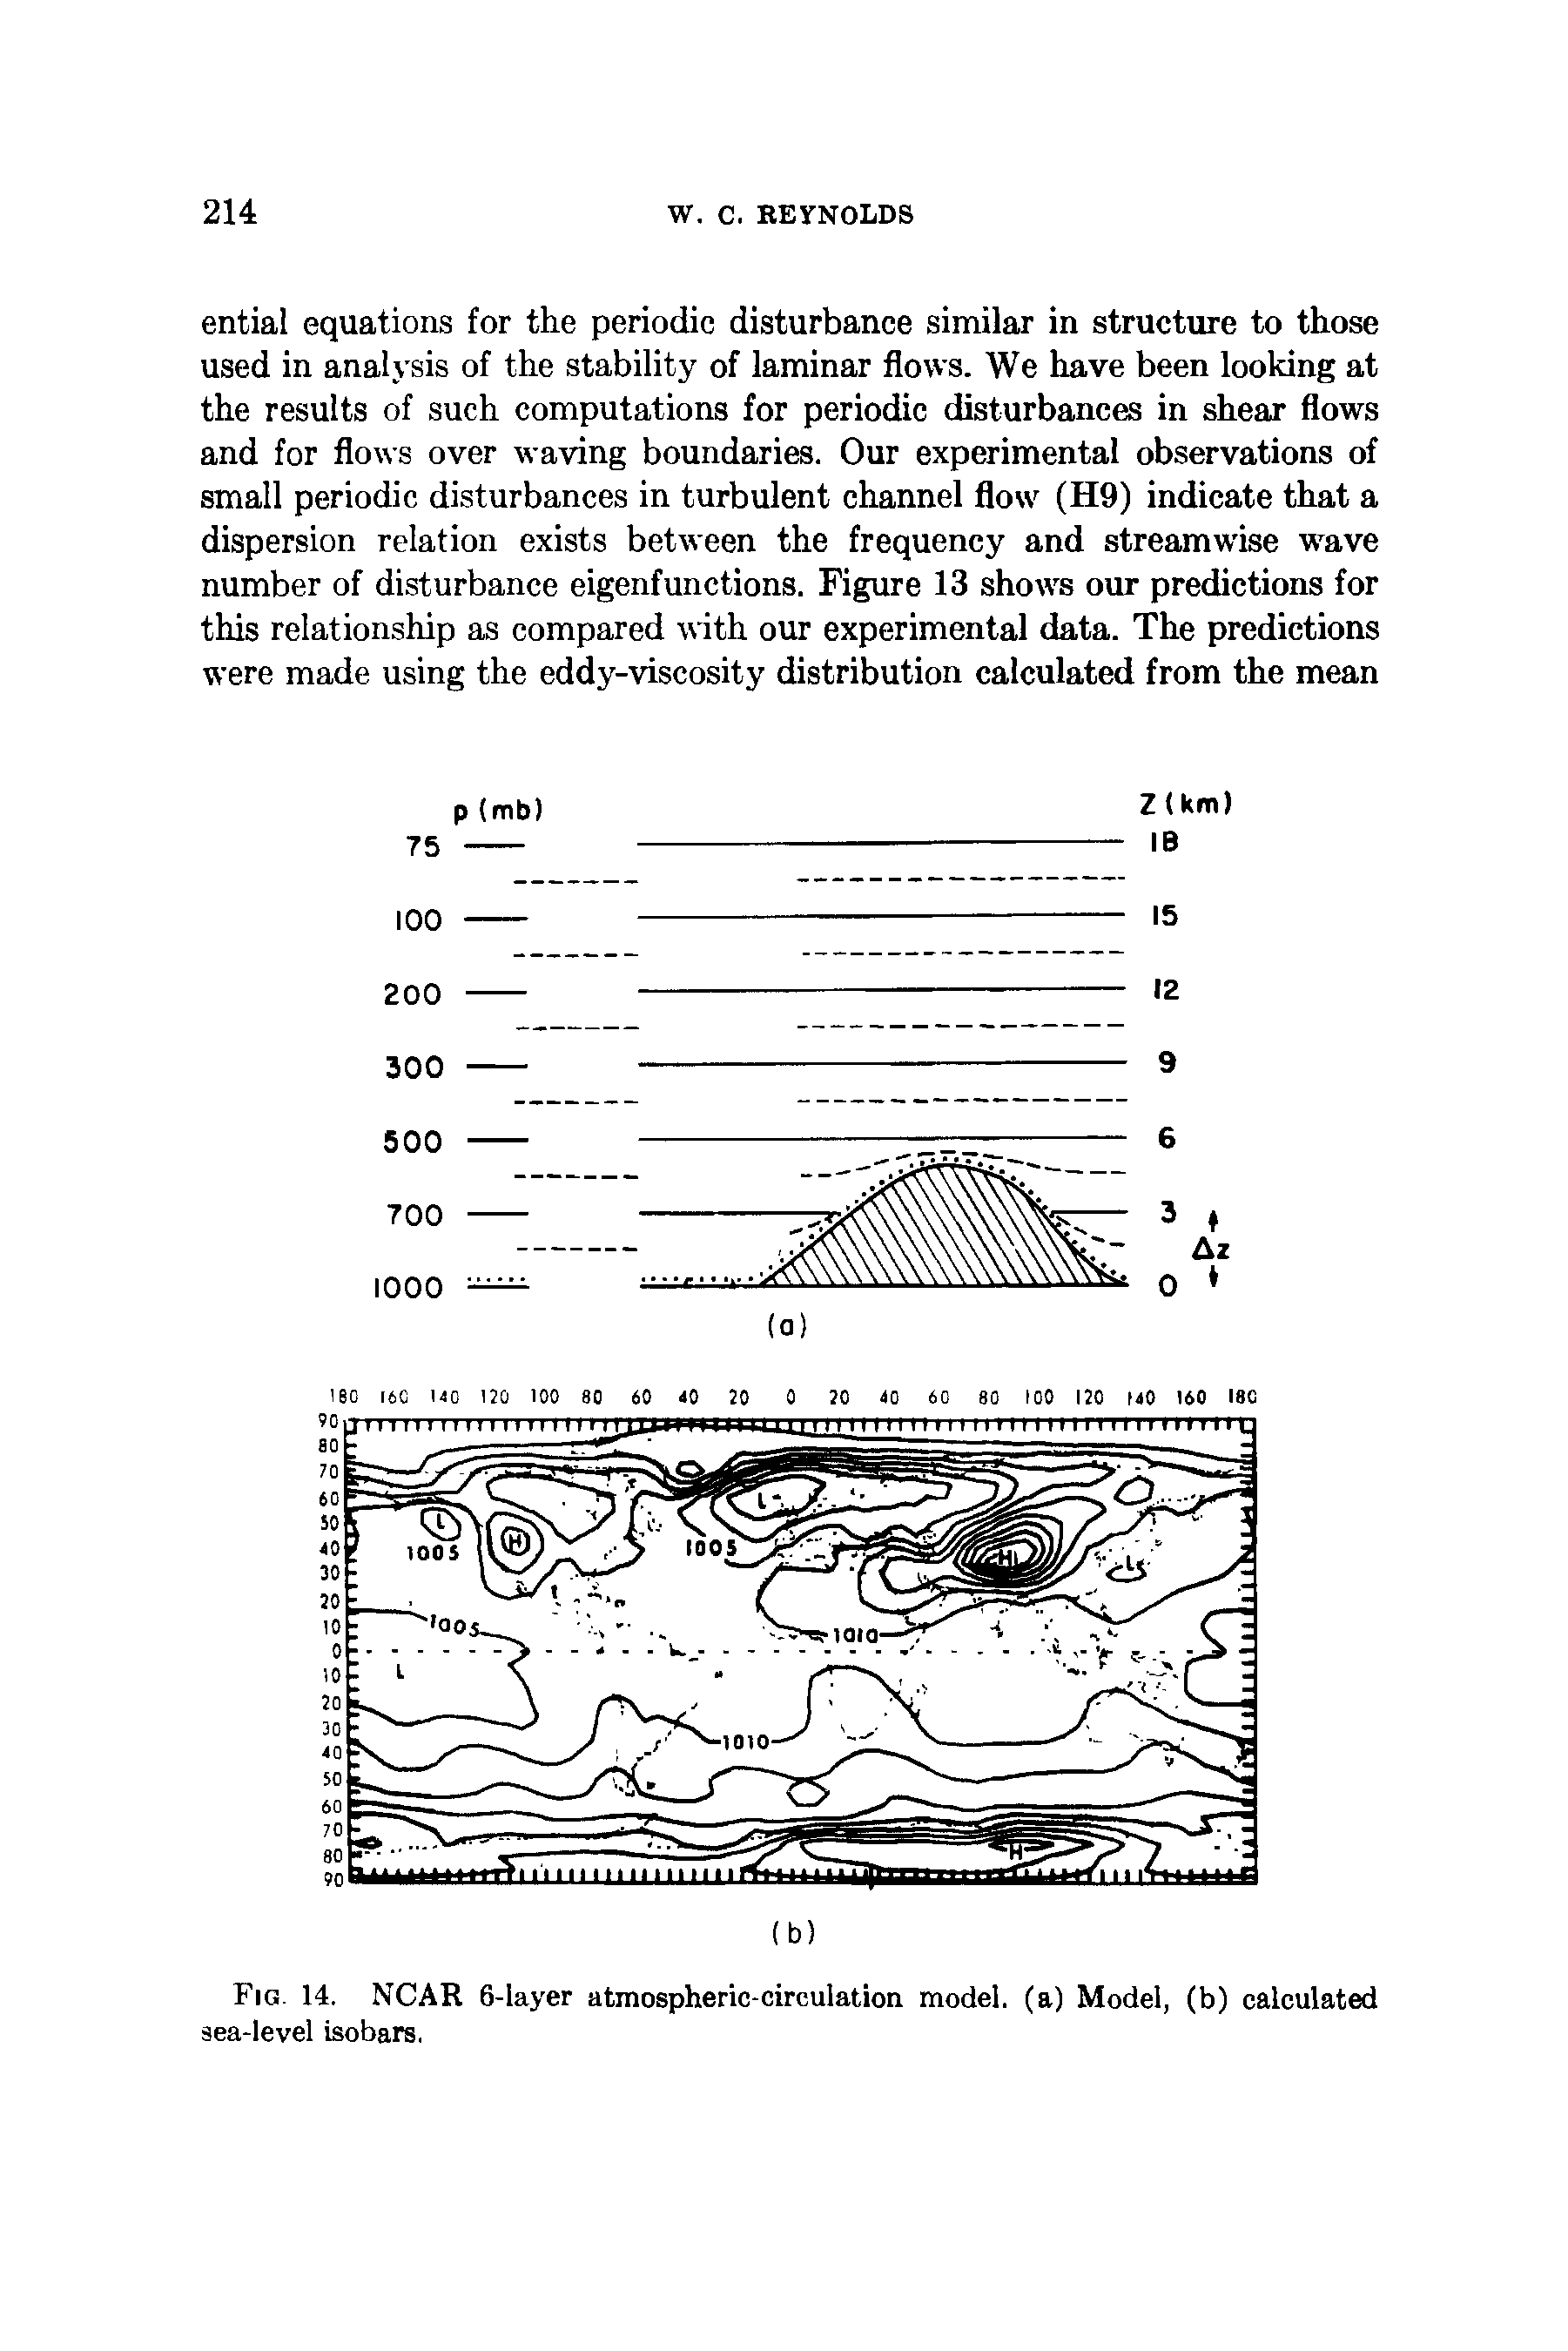 Fig. 14. NCAR 6-layer atmospheric-circulation model, (a) Model, (b) calculated aea-level isobars.